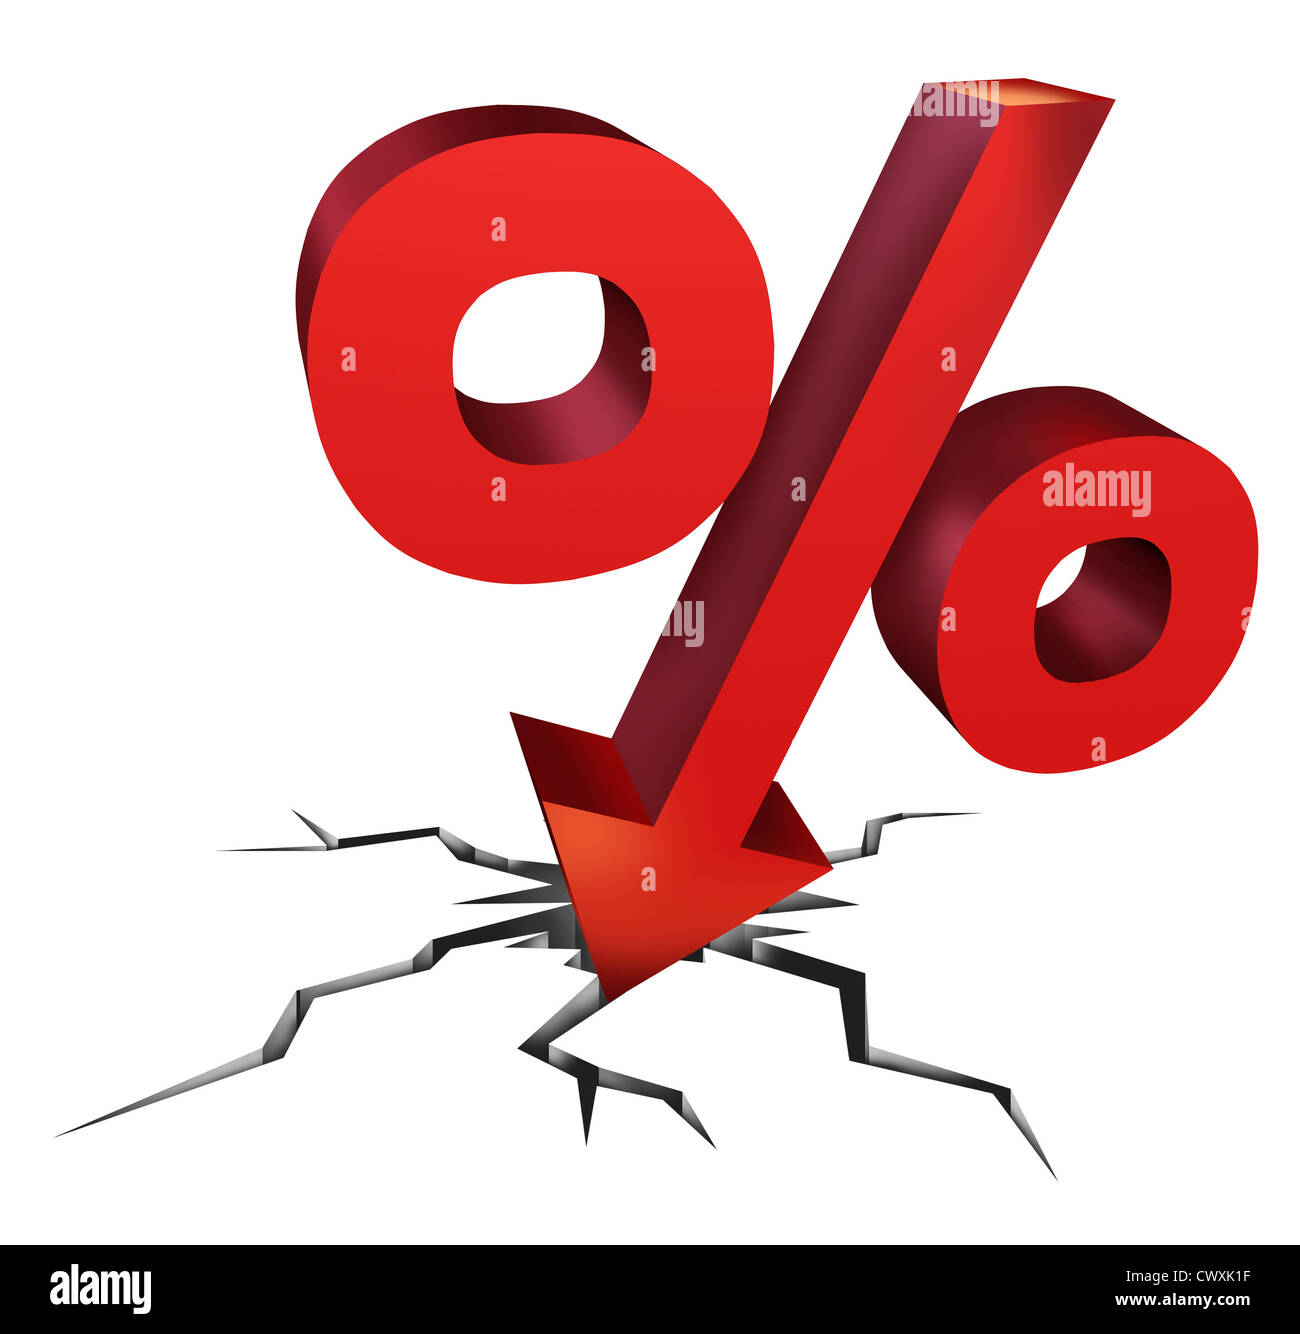 Falling interest rates as a red percentage sign as a symbol of an economic crash withh aa arrow falling down as a decline in money to be payed or bad investment decisions on a white background. Stock Photo